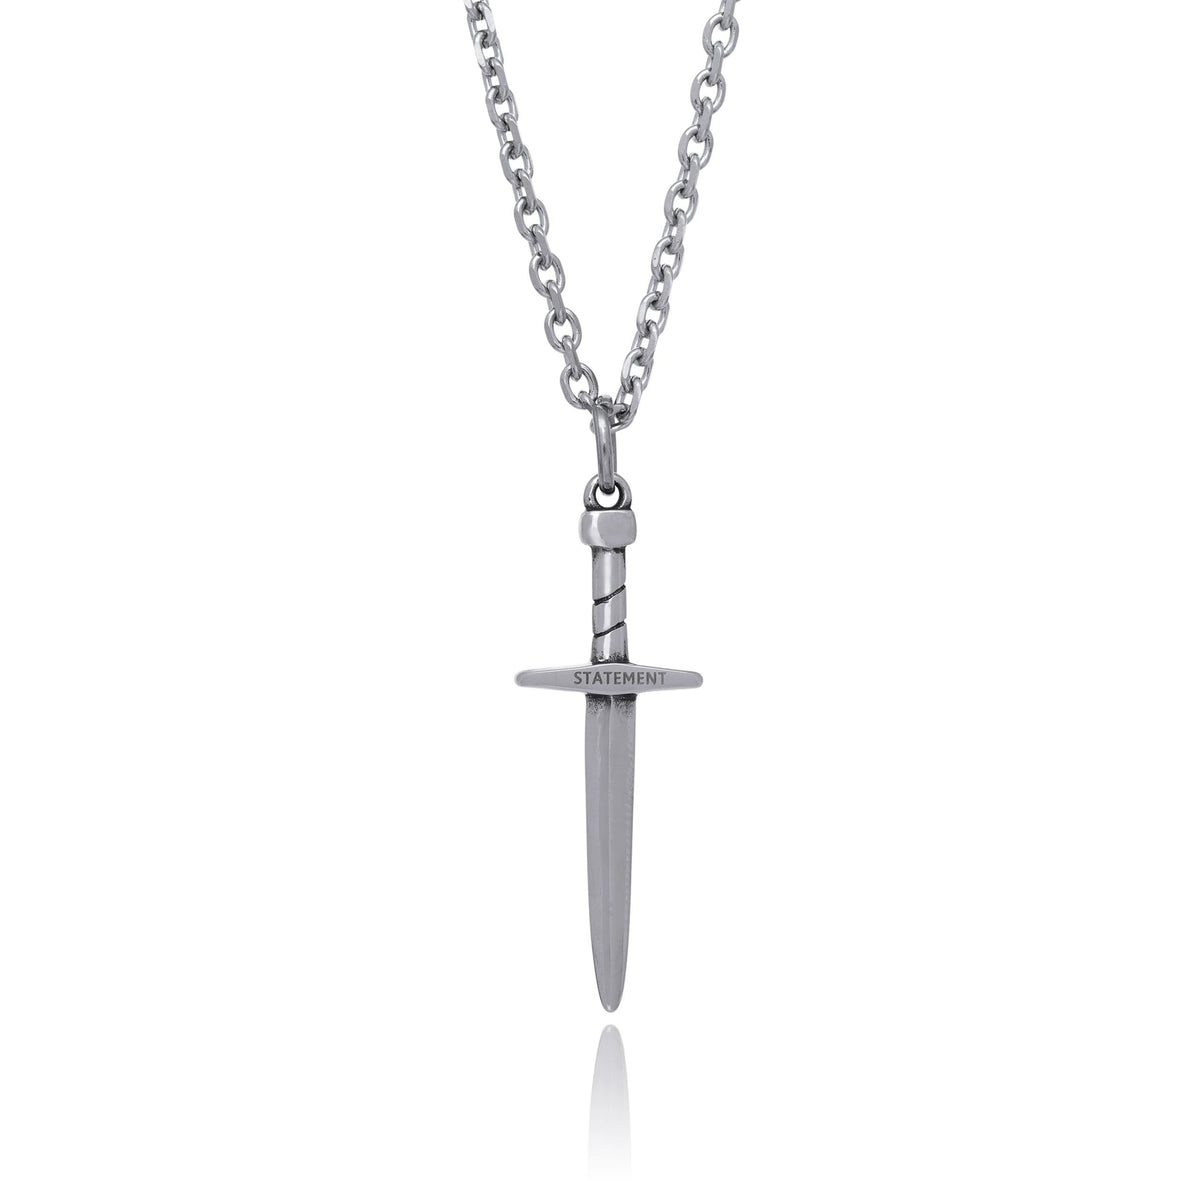 Dagger Pendant Silver Necklace Chain For Men By Statement_02